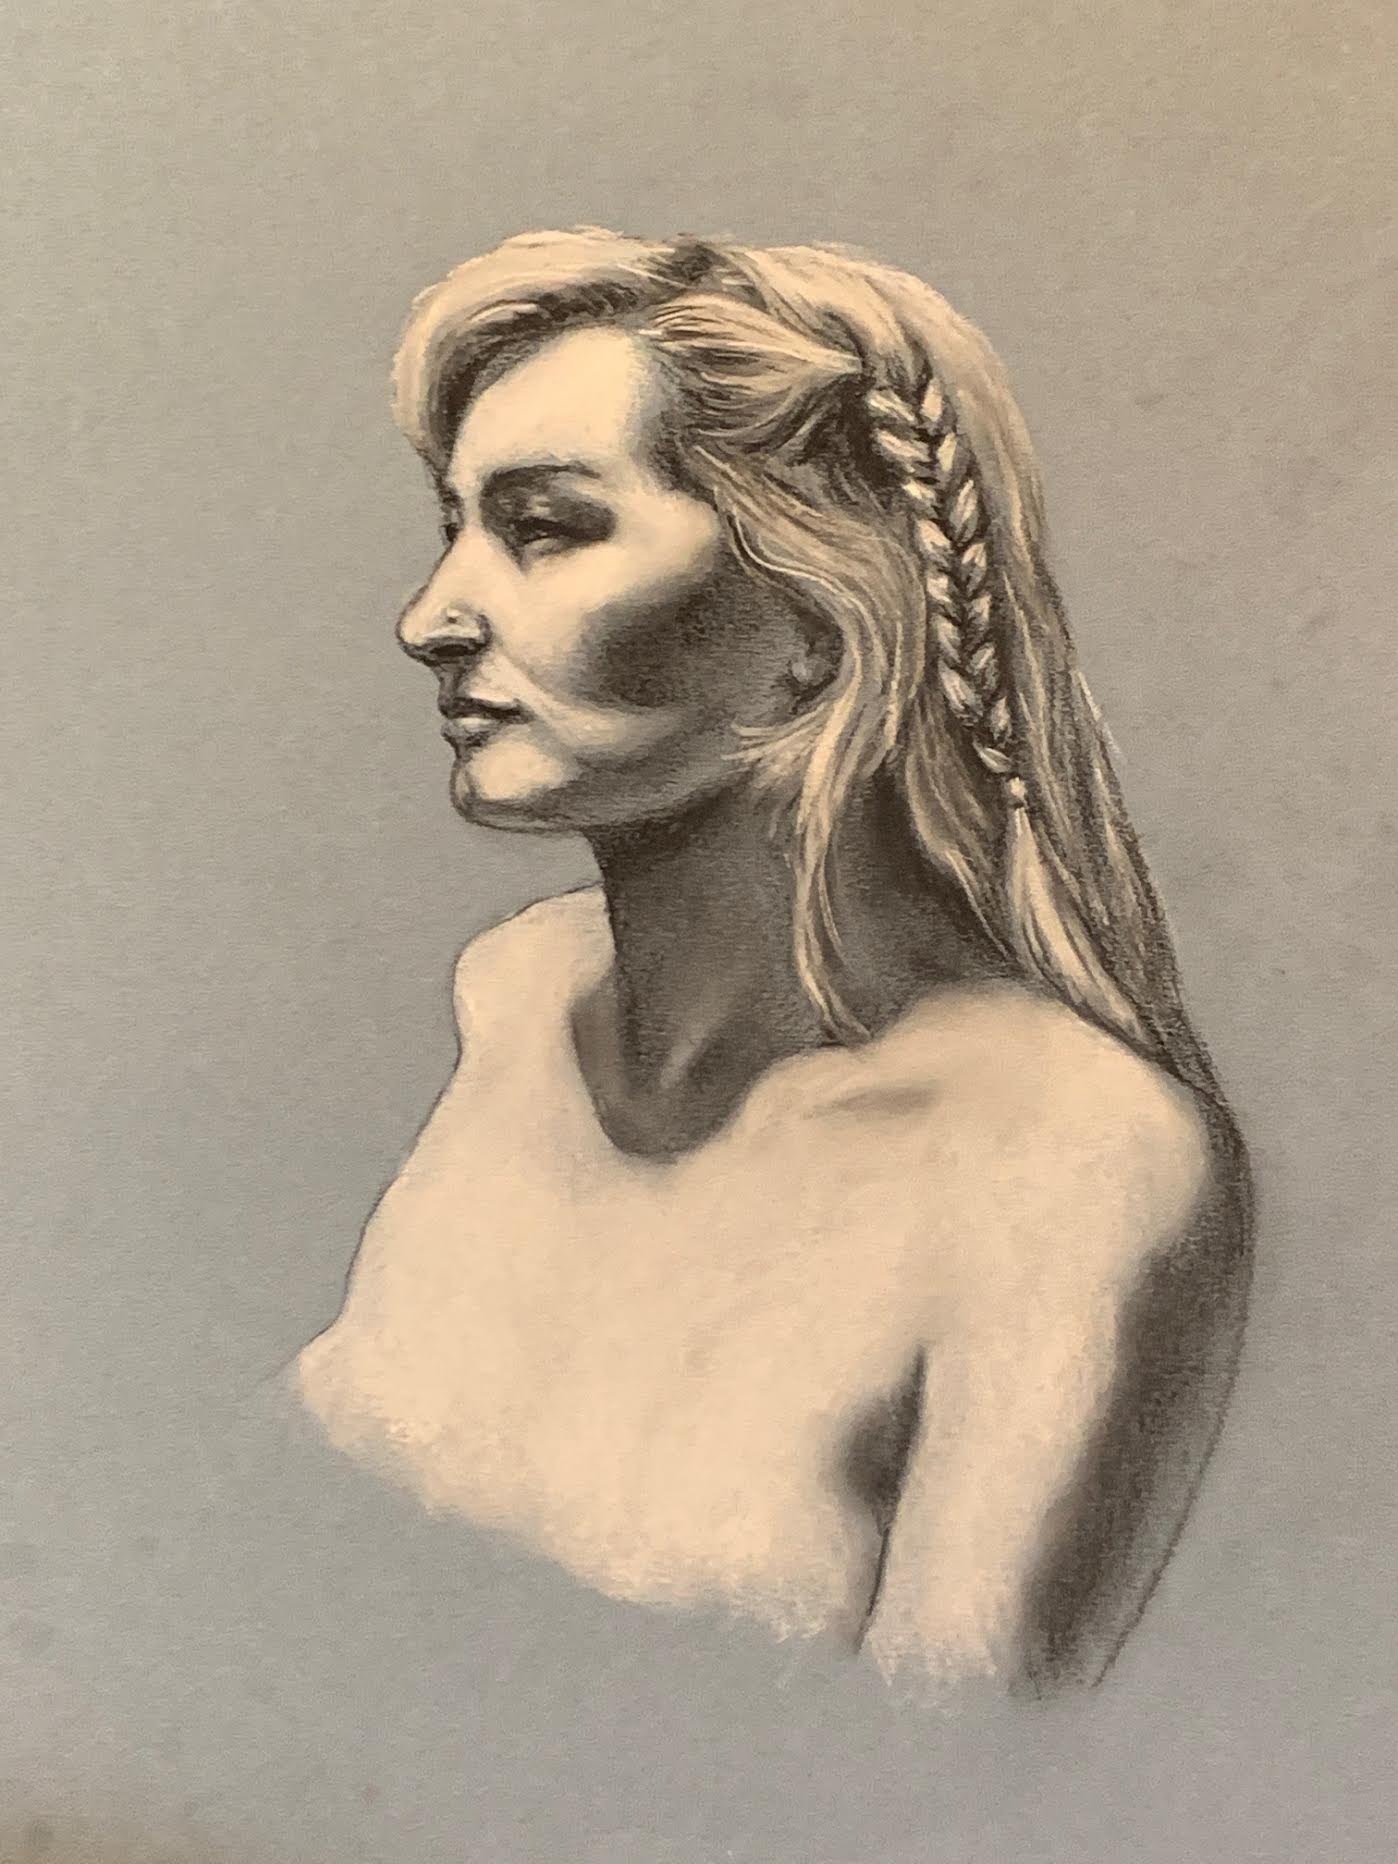 VAILENCE, Pastel and Charcoal on Paper, 2022